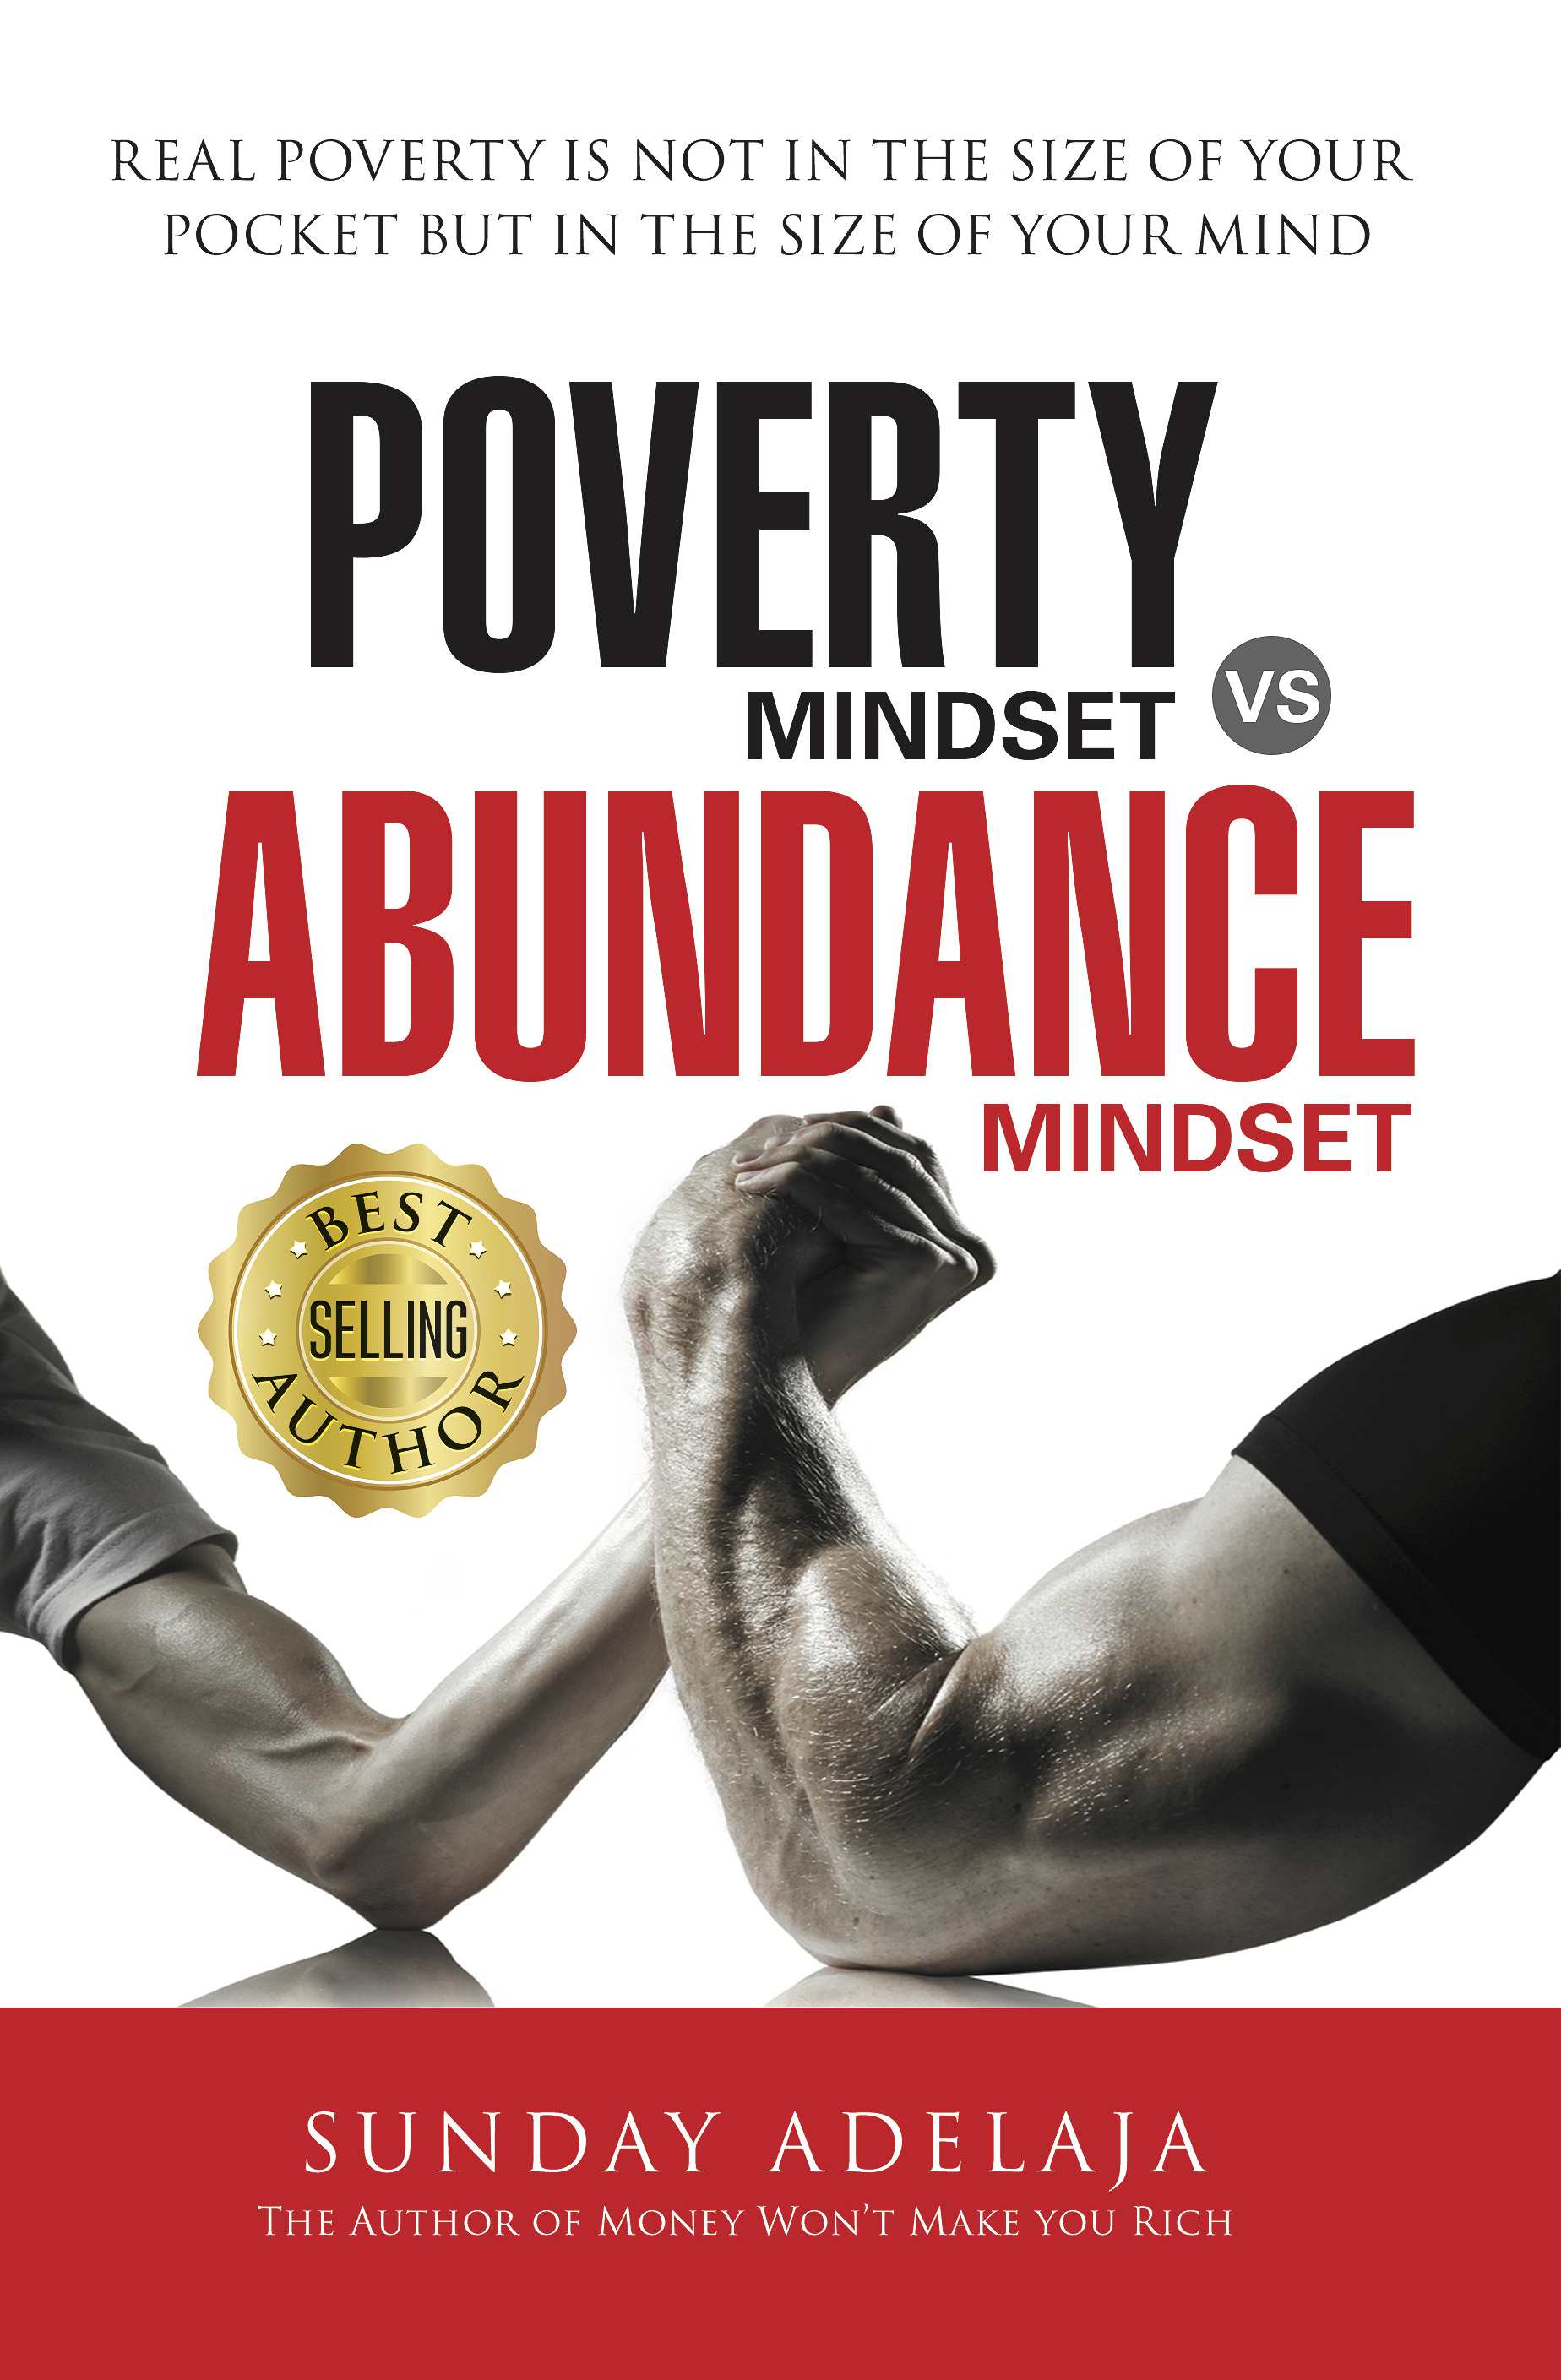 Poverty-Mindset-Vs-Abundance-Mindset--Real-poverty-is-not-in-the-size-of-your-pocket-but-in-the-size-of-your-mind